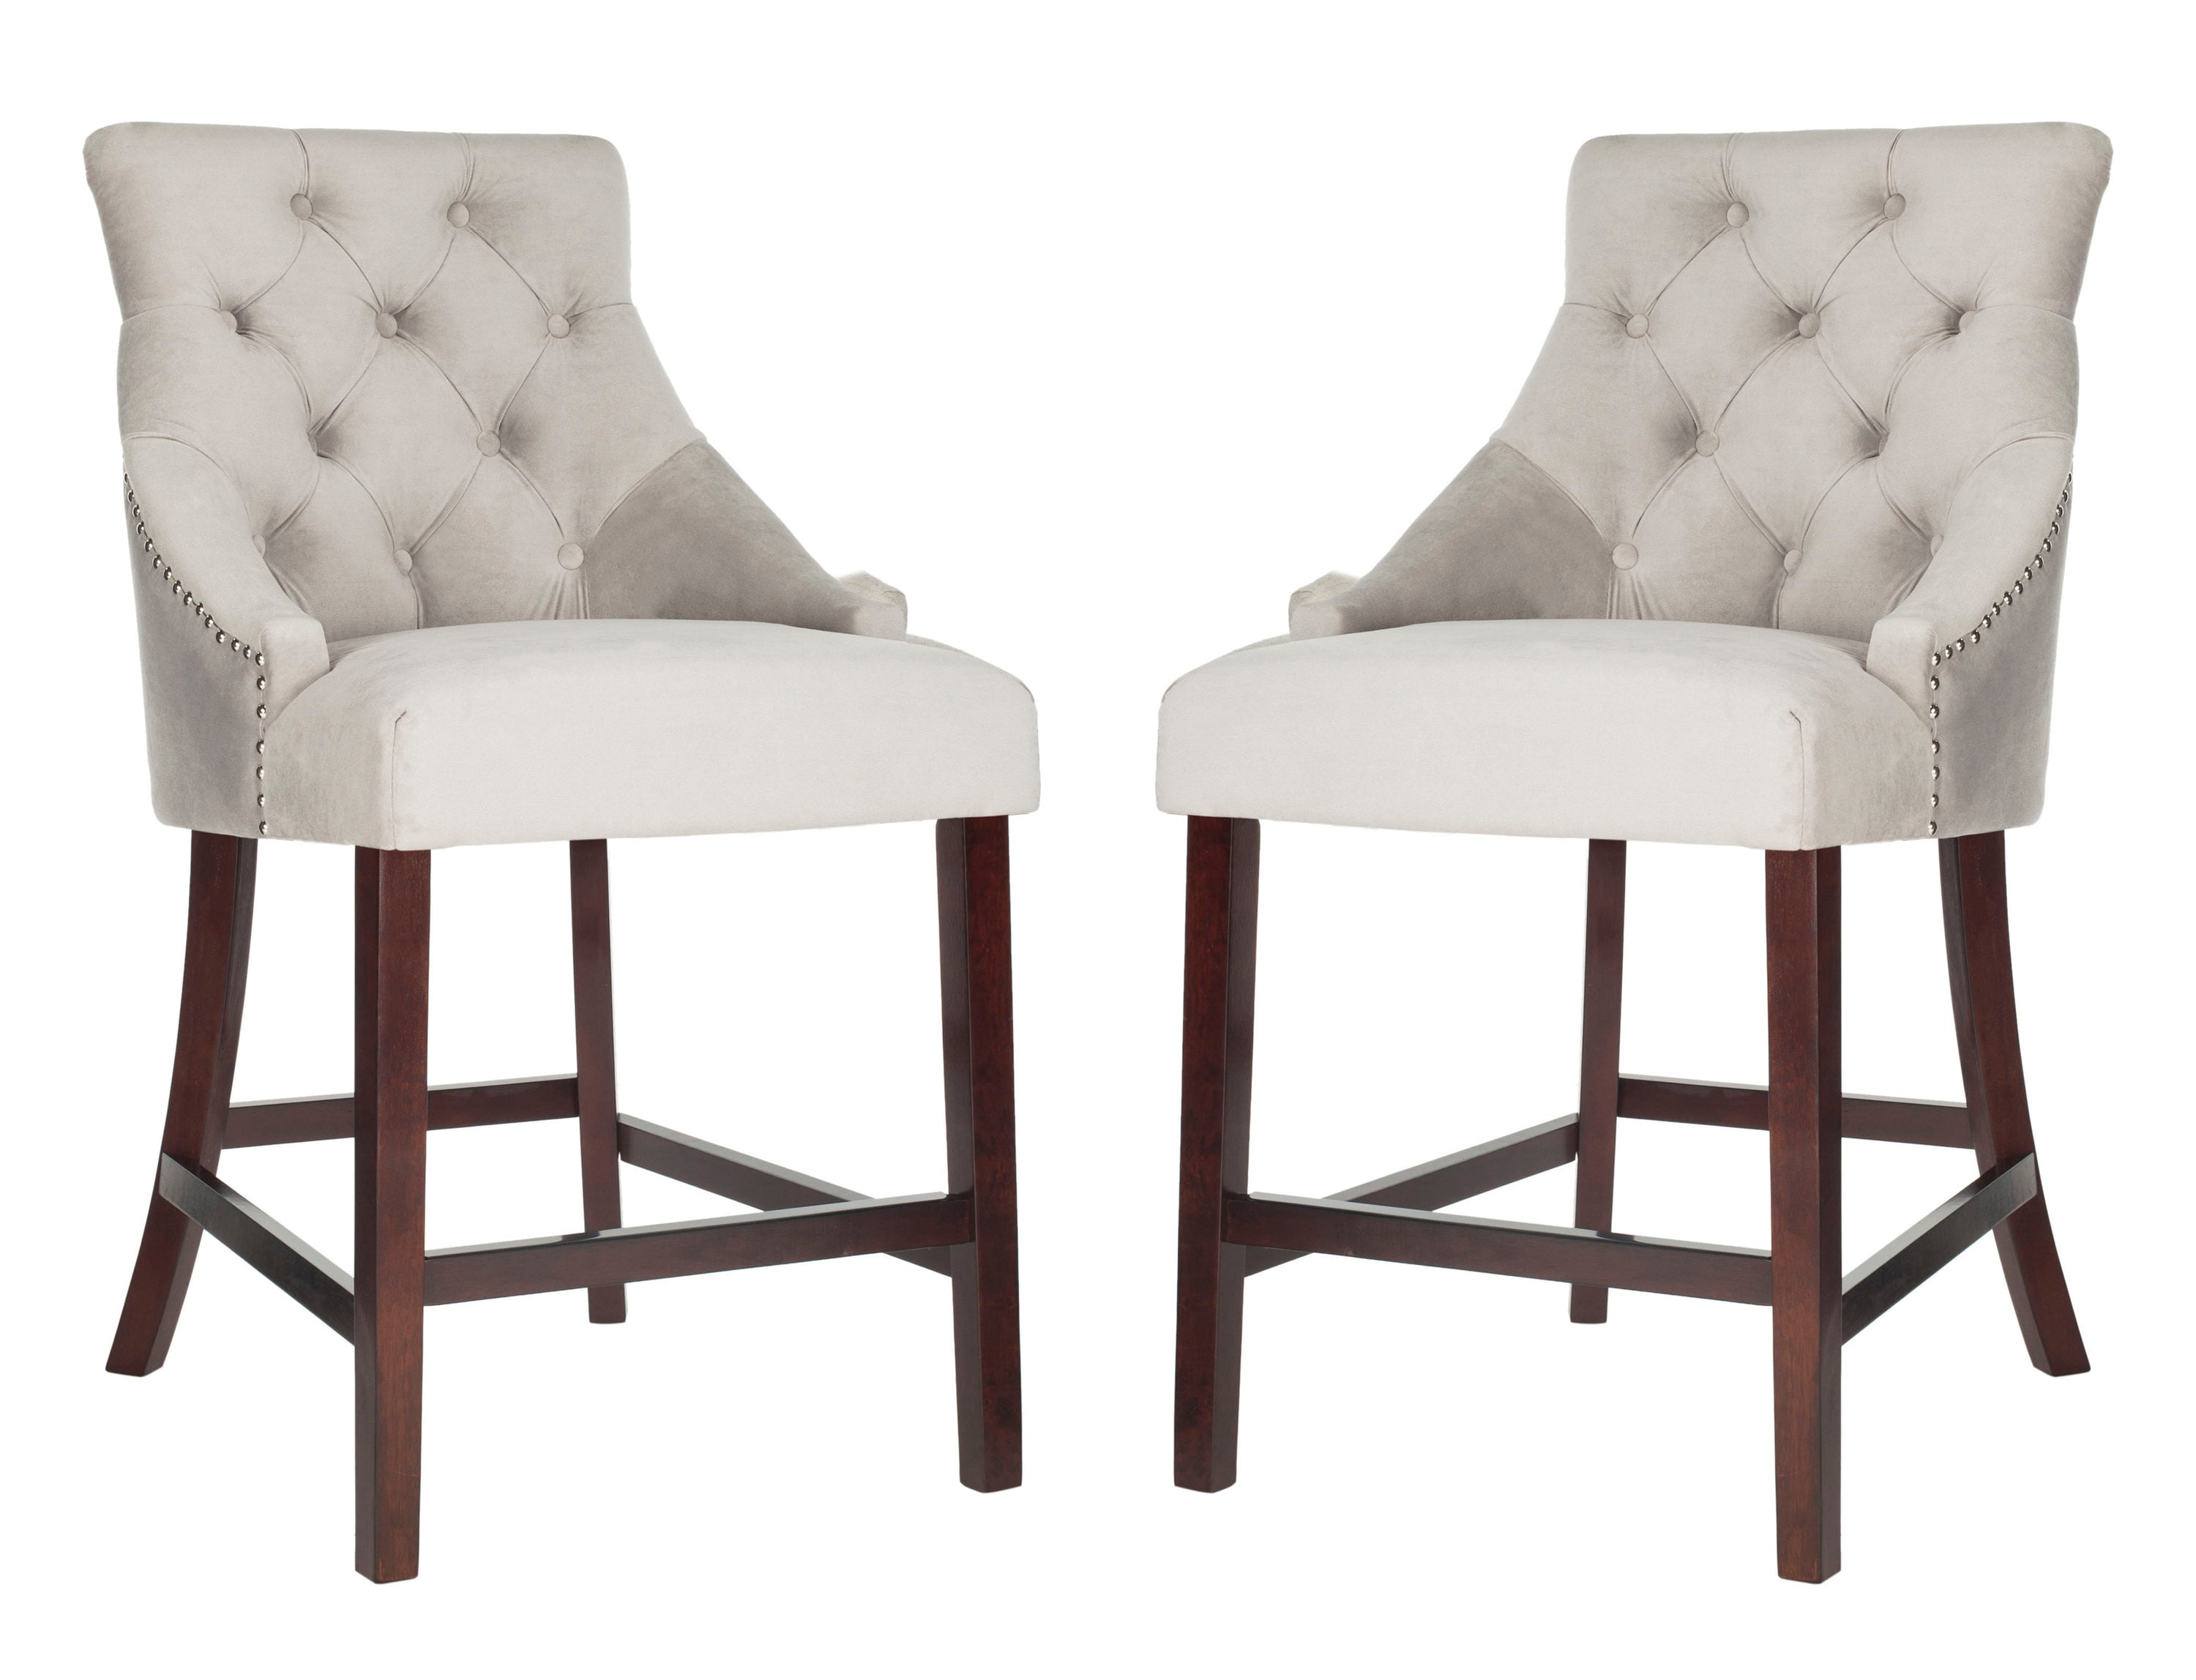 Upholstered Bar Stool In The Stools, Gray Tufted Bar Stools